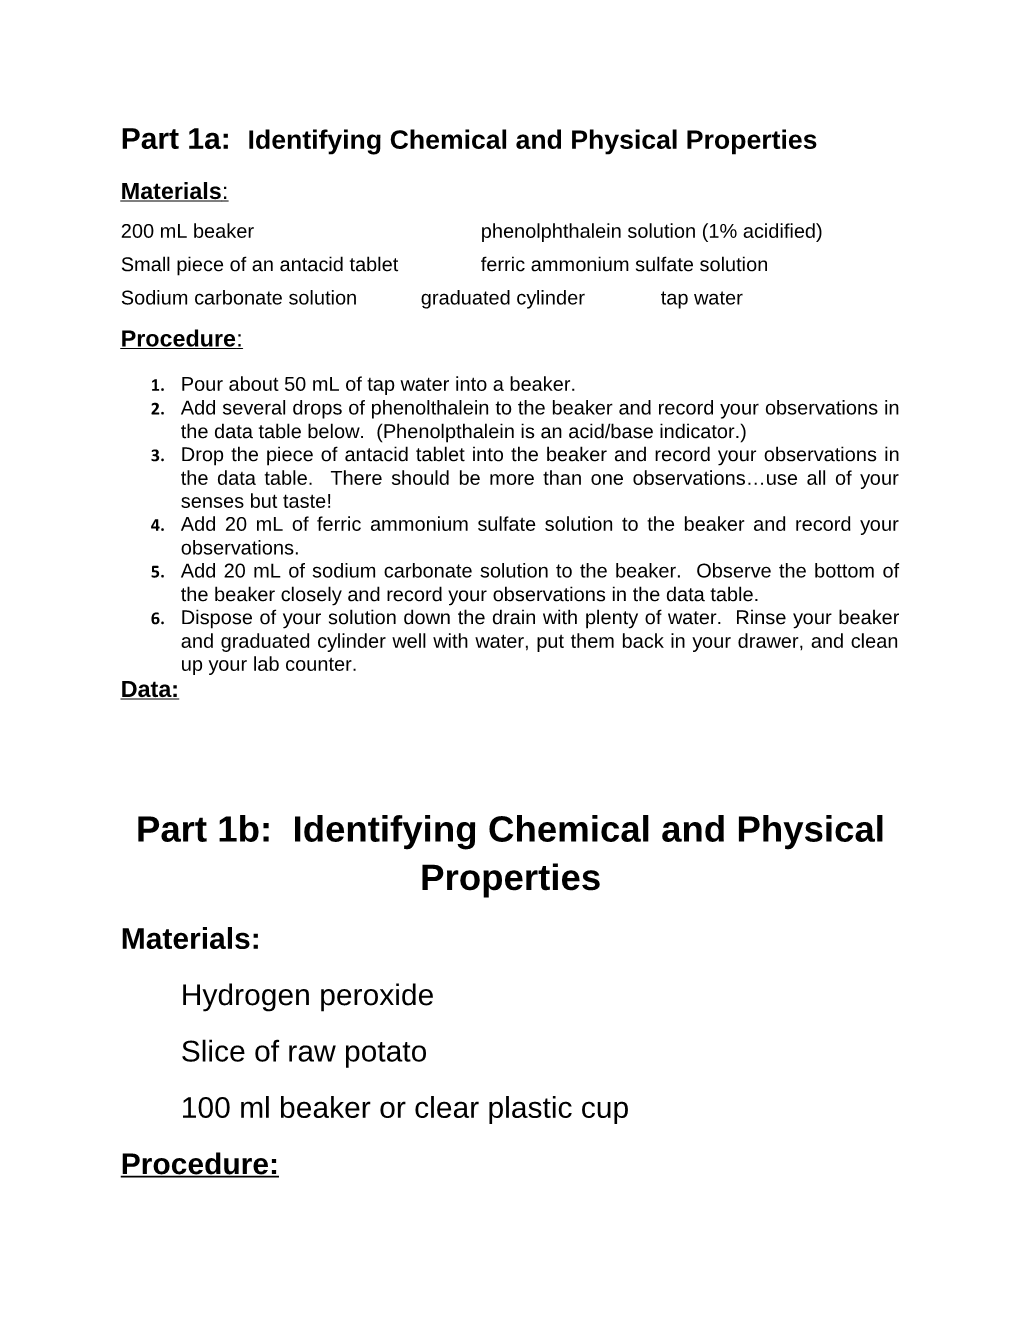 Part 1A: Identifying Chemical and Physical Properties